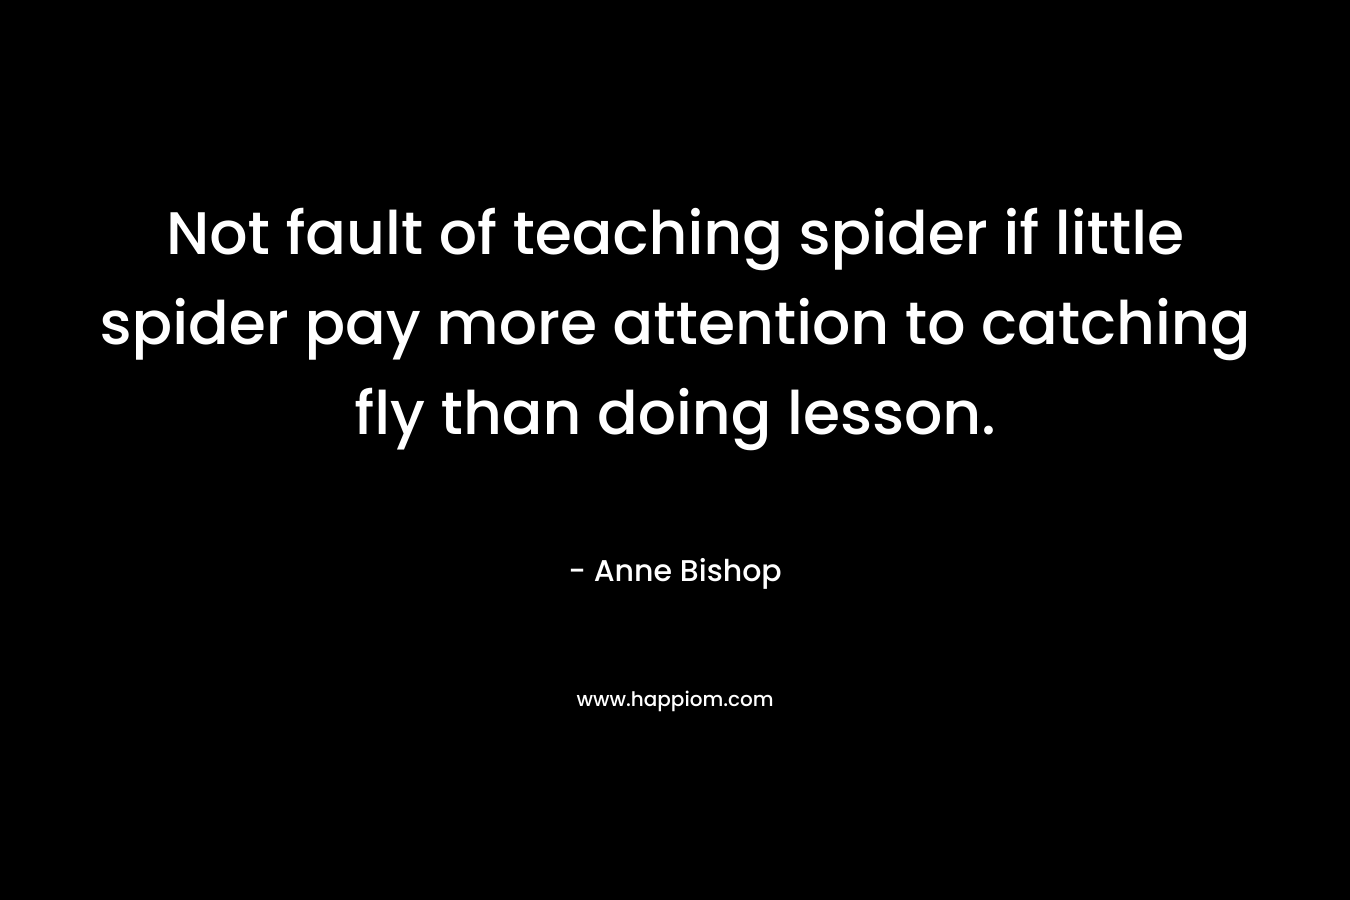 Not fault of teaching spider if little spider pay more attention to catching fly than doing lesson.